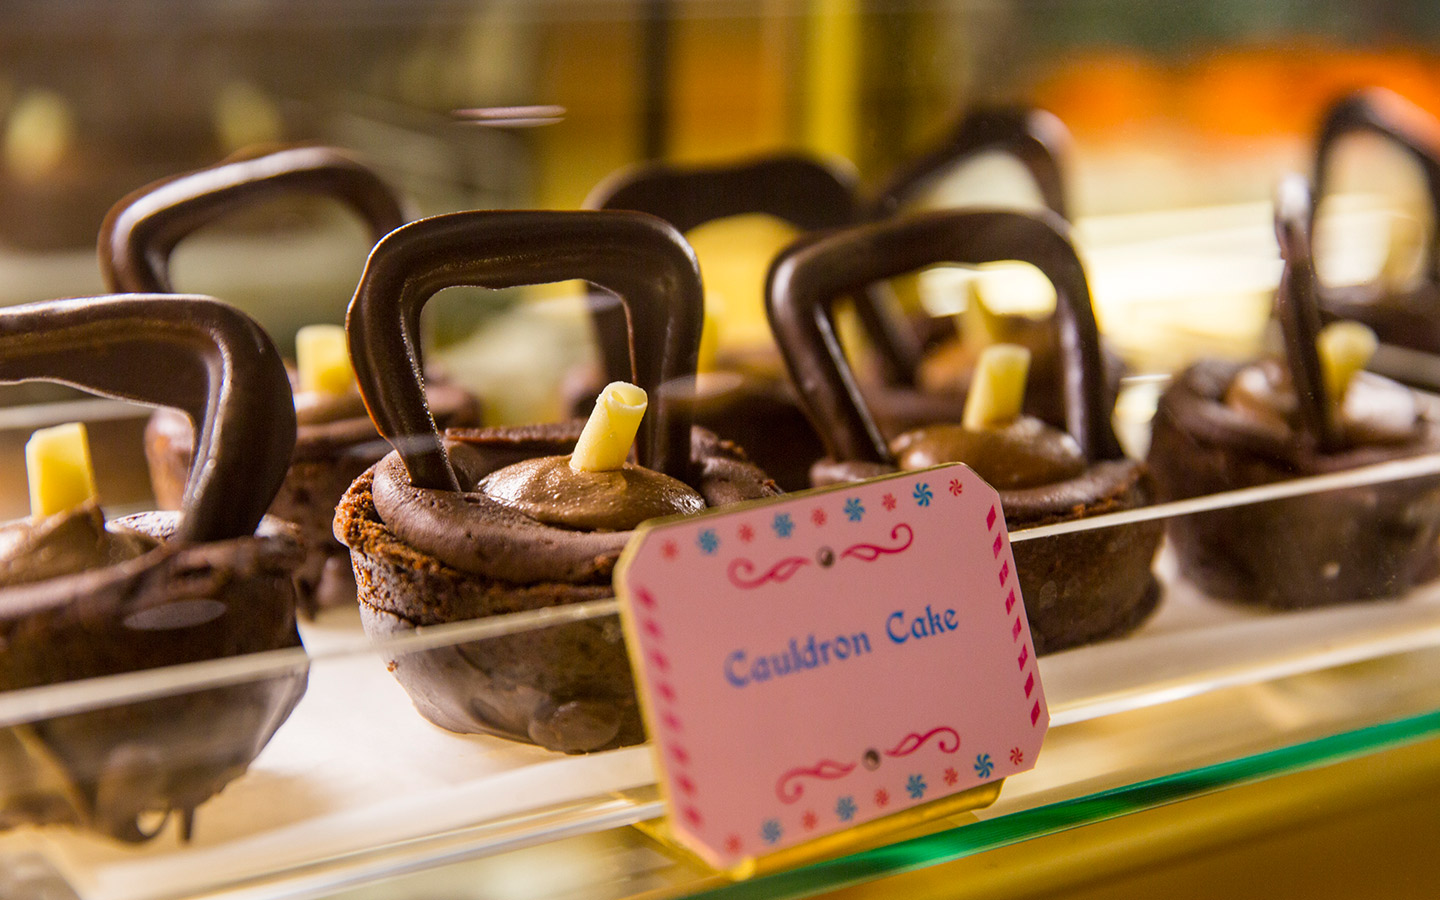 Indugle in Cauldron Cakes at Sugarplum's sweet shop in The Wizarding World of Harry Potter - Diagon Alley